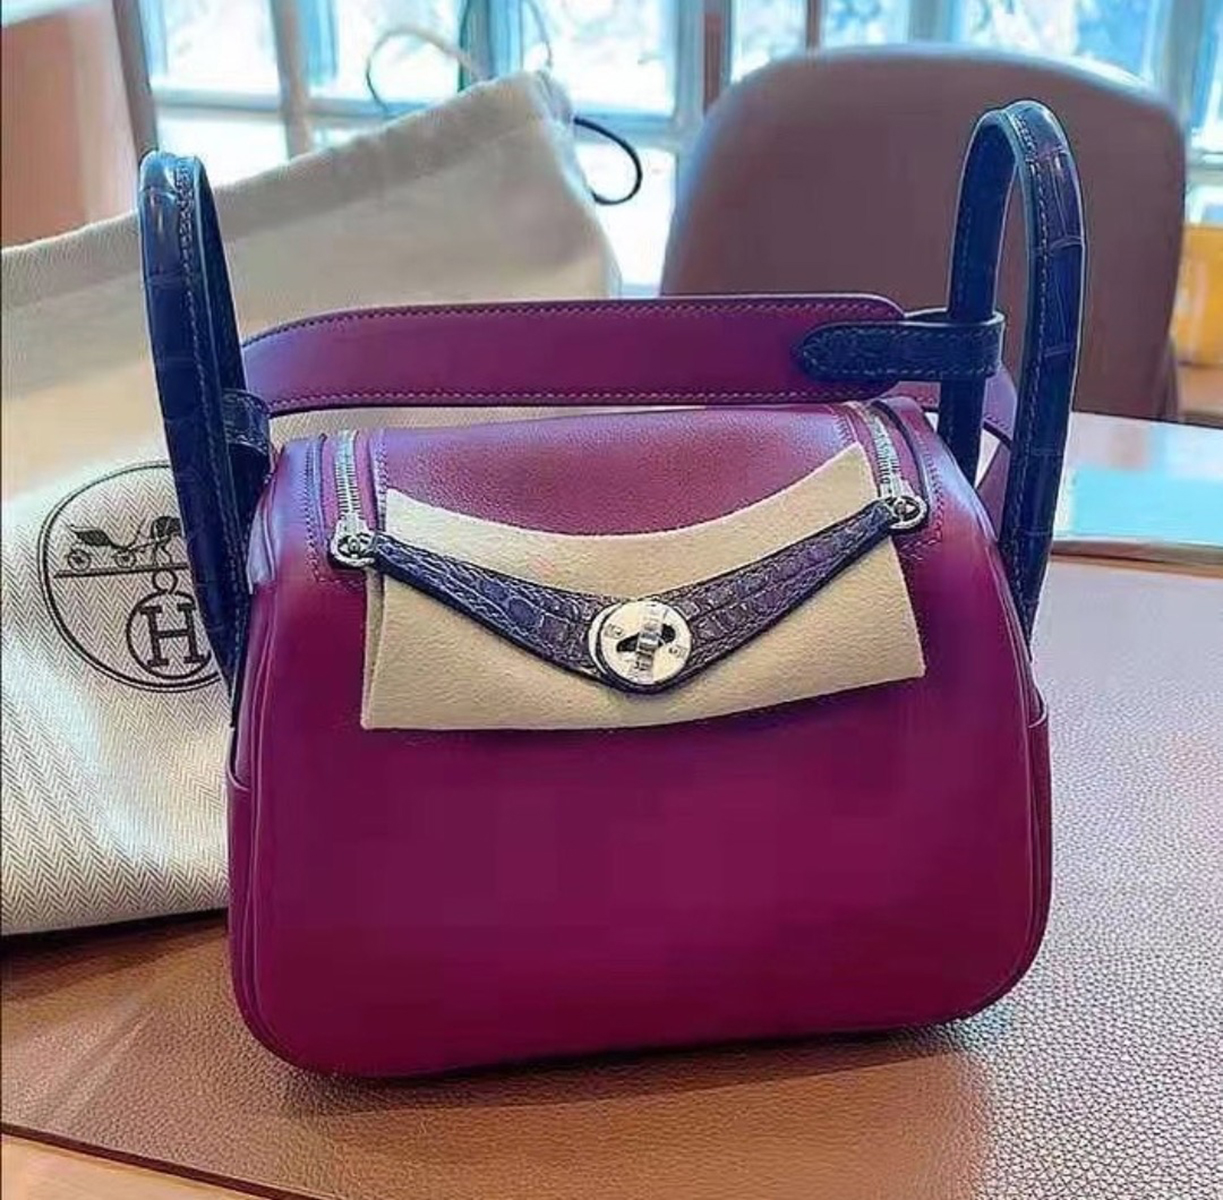 A Mini Lindy in Anemone with Cassis Matte Gator from February 2021. Photo courtesy of TPFer @Meta.